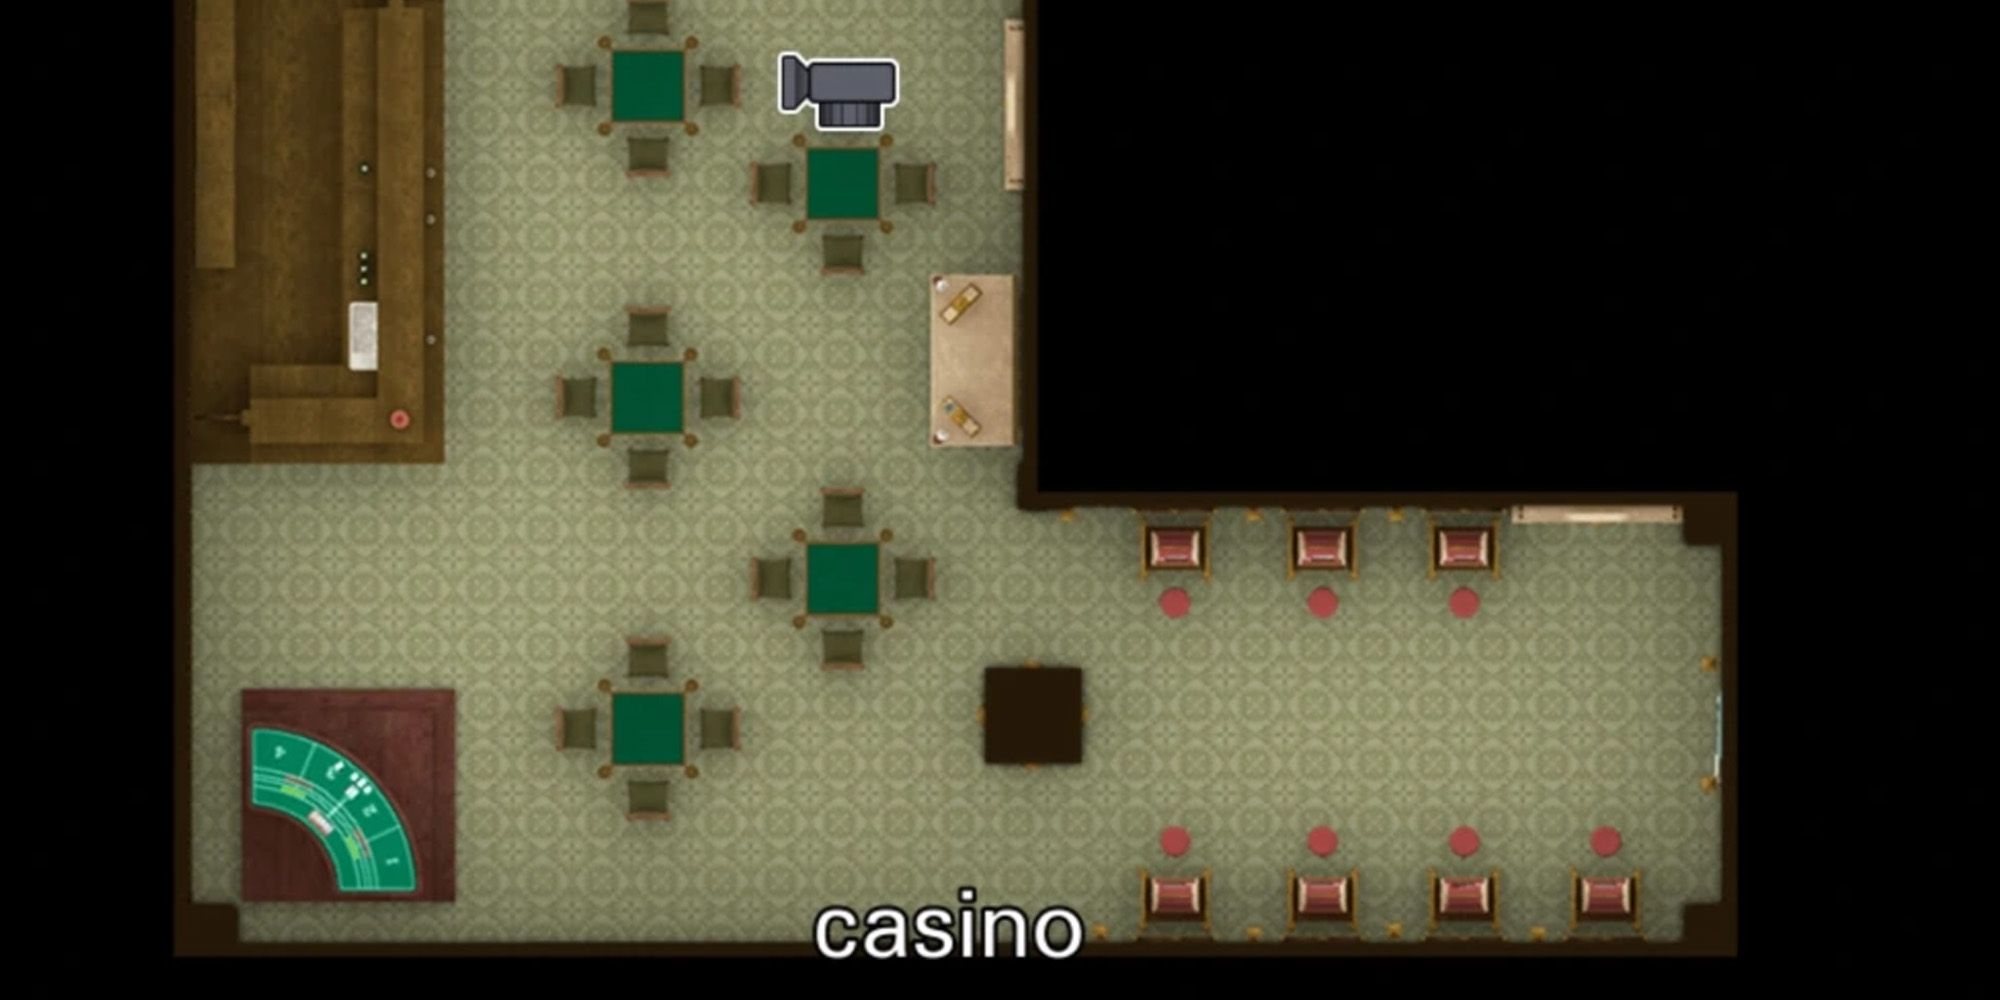 An Overview Map of the Casino Area